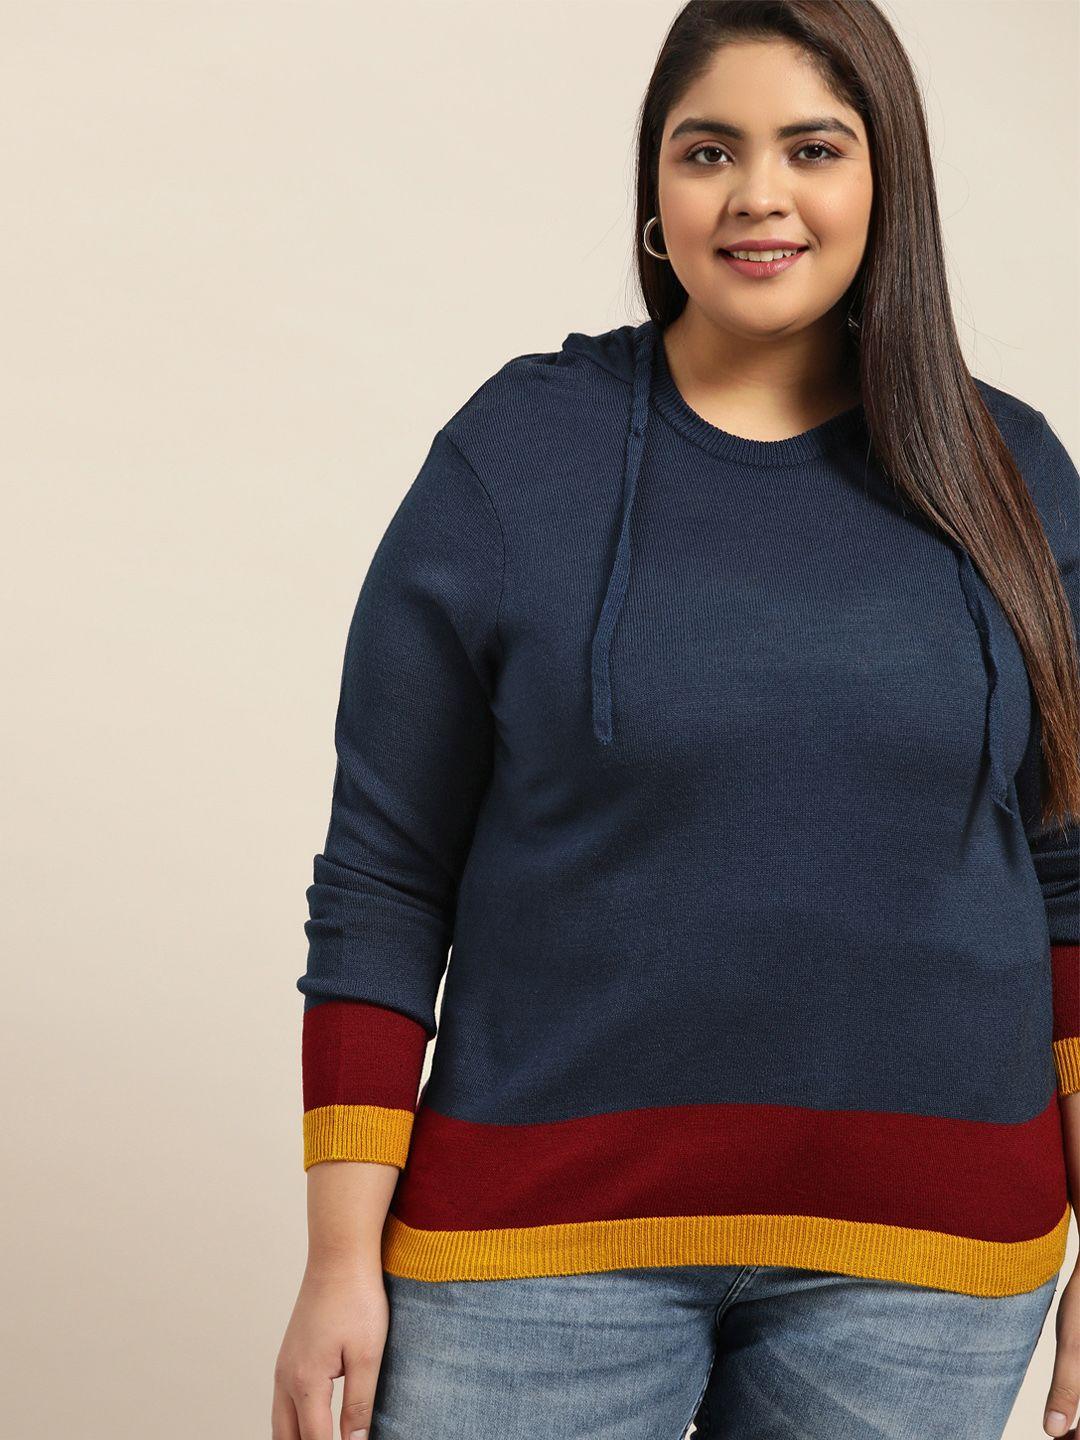 sztori women plus size navy blue & maroon acrylic solid hooded pullover